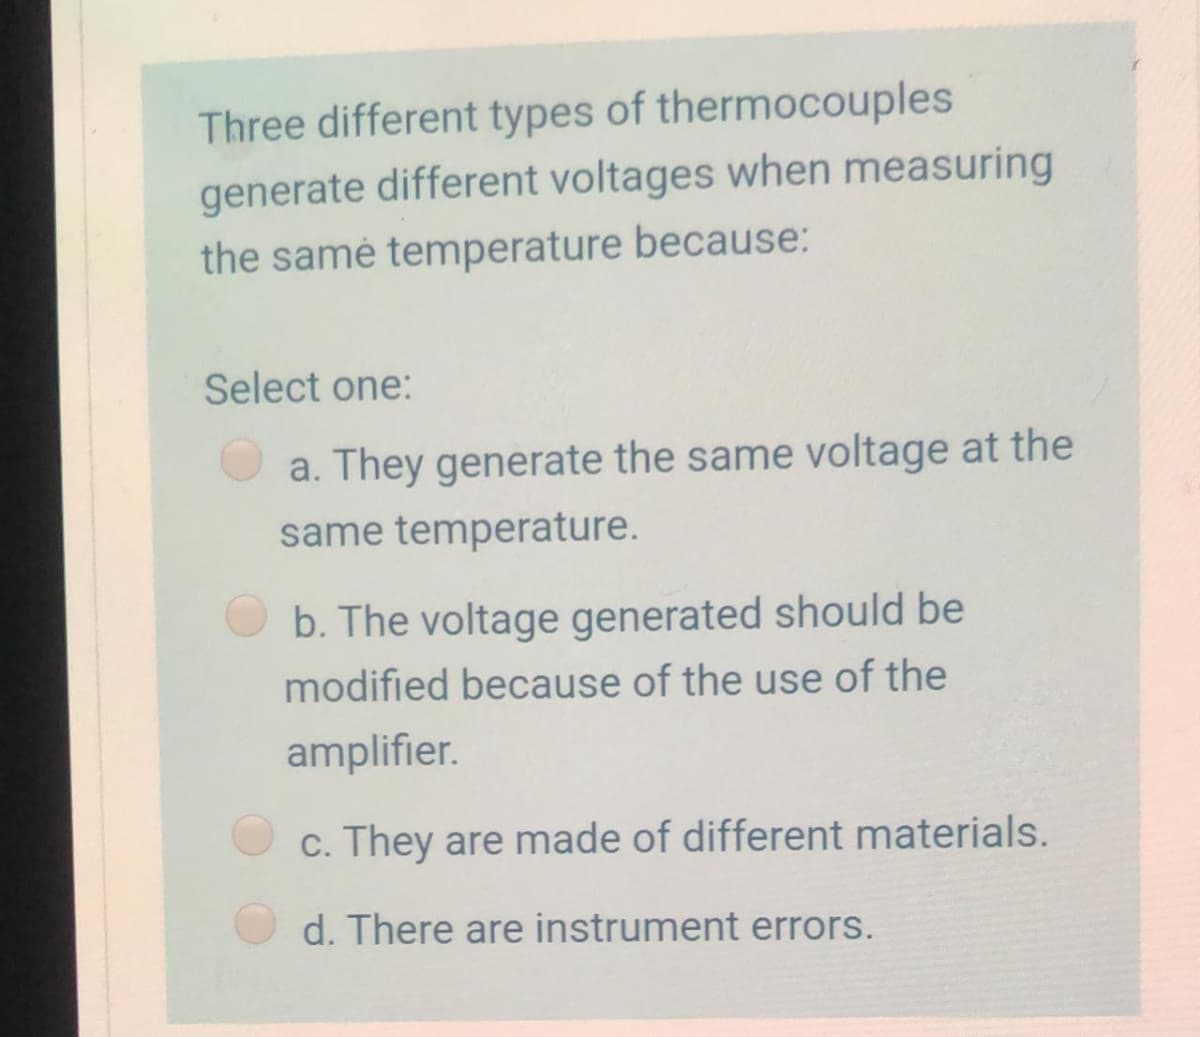 Three different types of thermocouples
generate different voltages when measuring
the samé temperature because:
Select one:
a. They generate the same voltage at the
same temperature.
b. The voltage generated should be
modified because of the use of the
amplifier.
c. They are made of different materials.
d. There are instrument errors.
